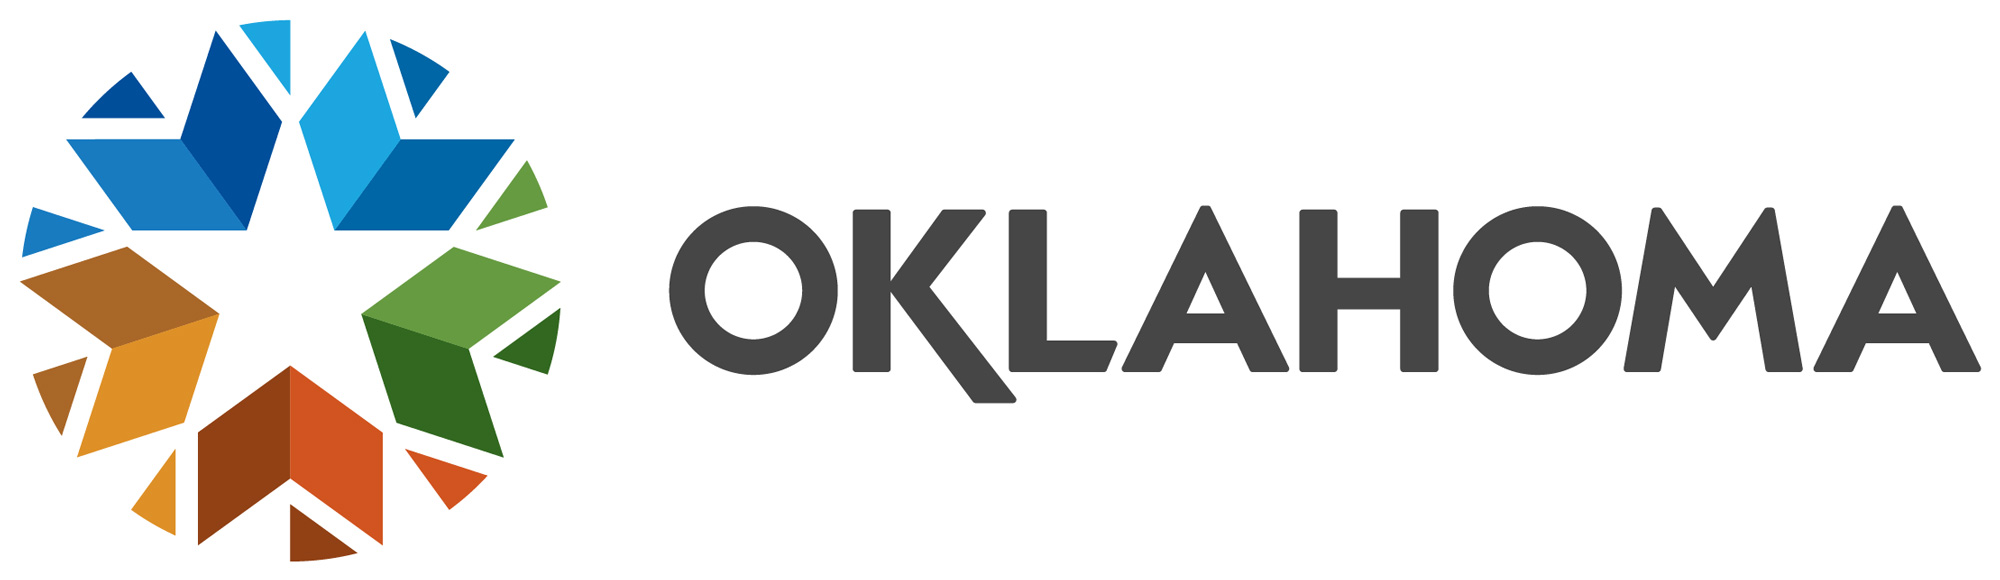 New Logo for the State of Oklahoma